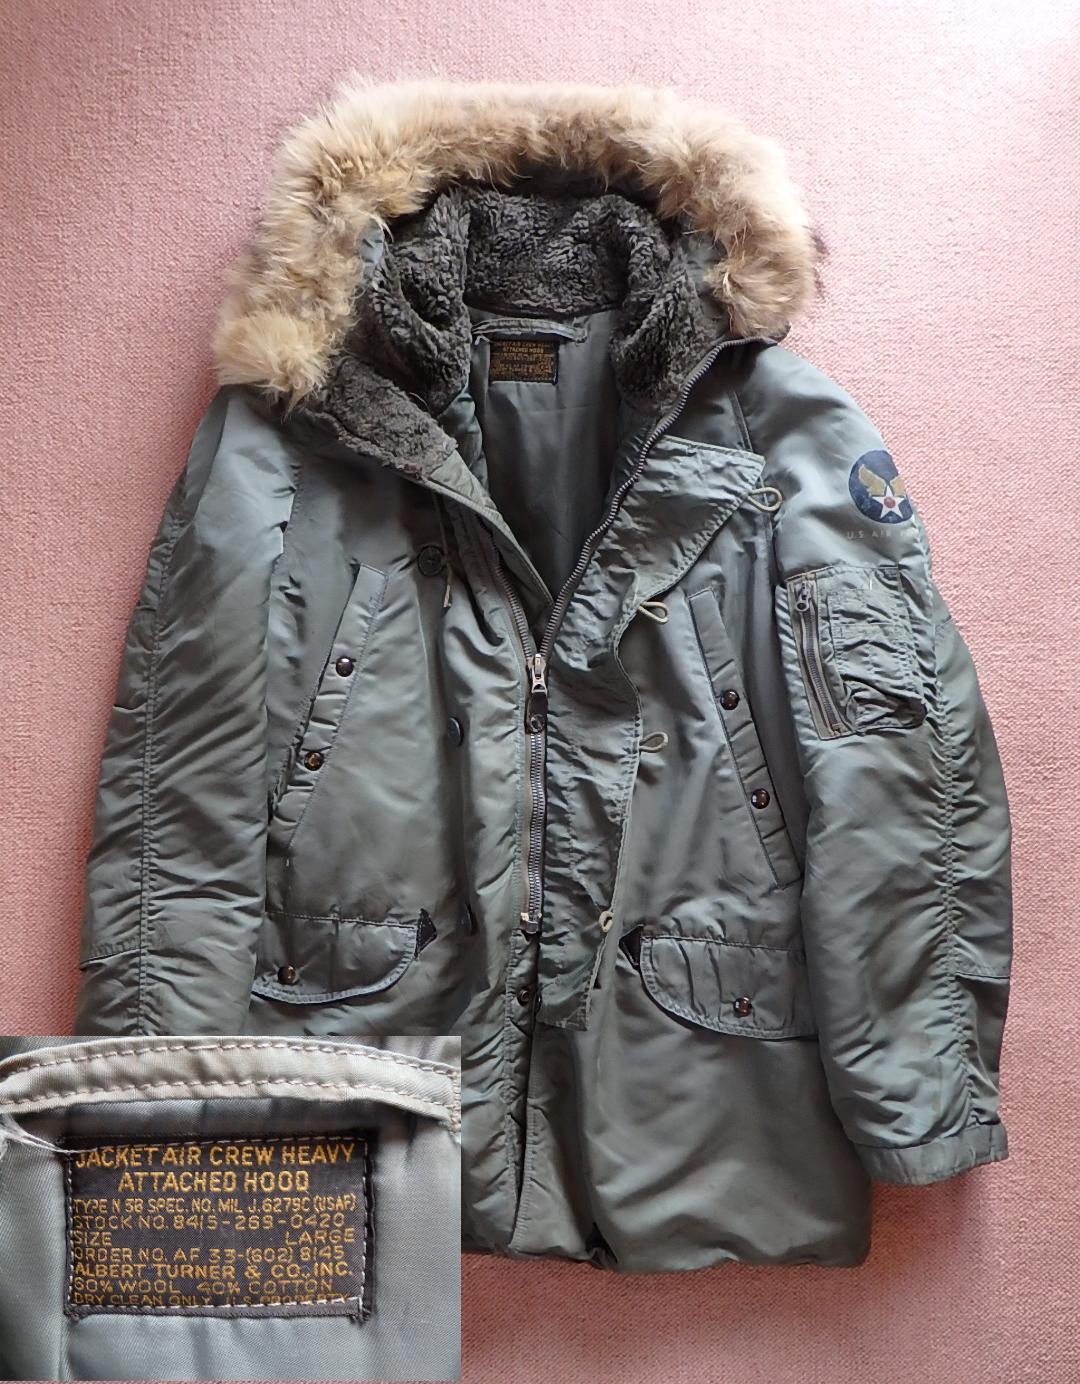 JACKET AIRCREW HEAVY ATTACHED HOOD （L）黒